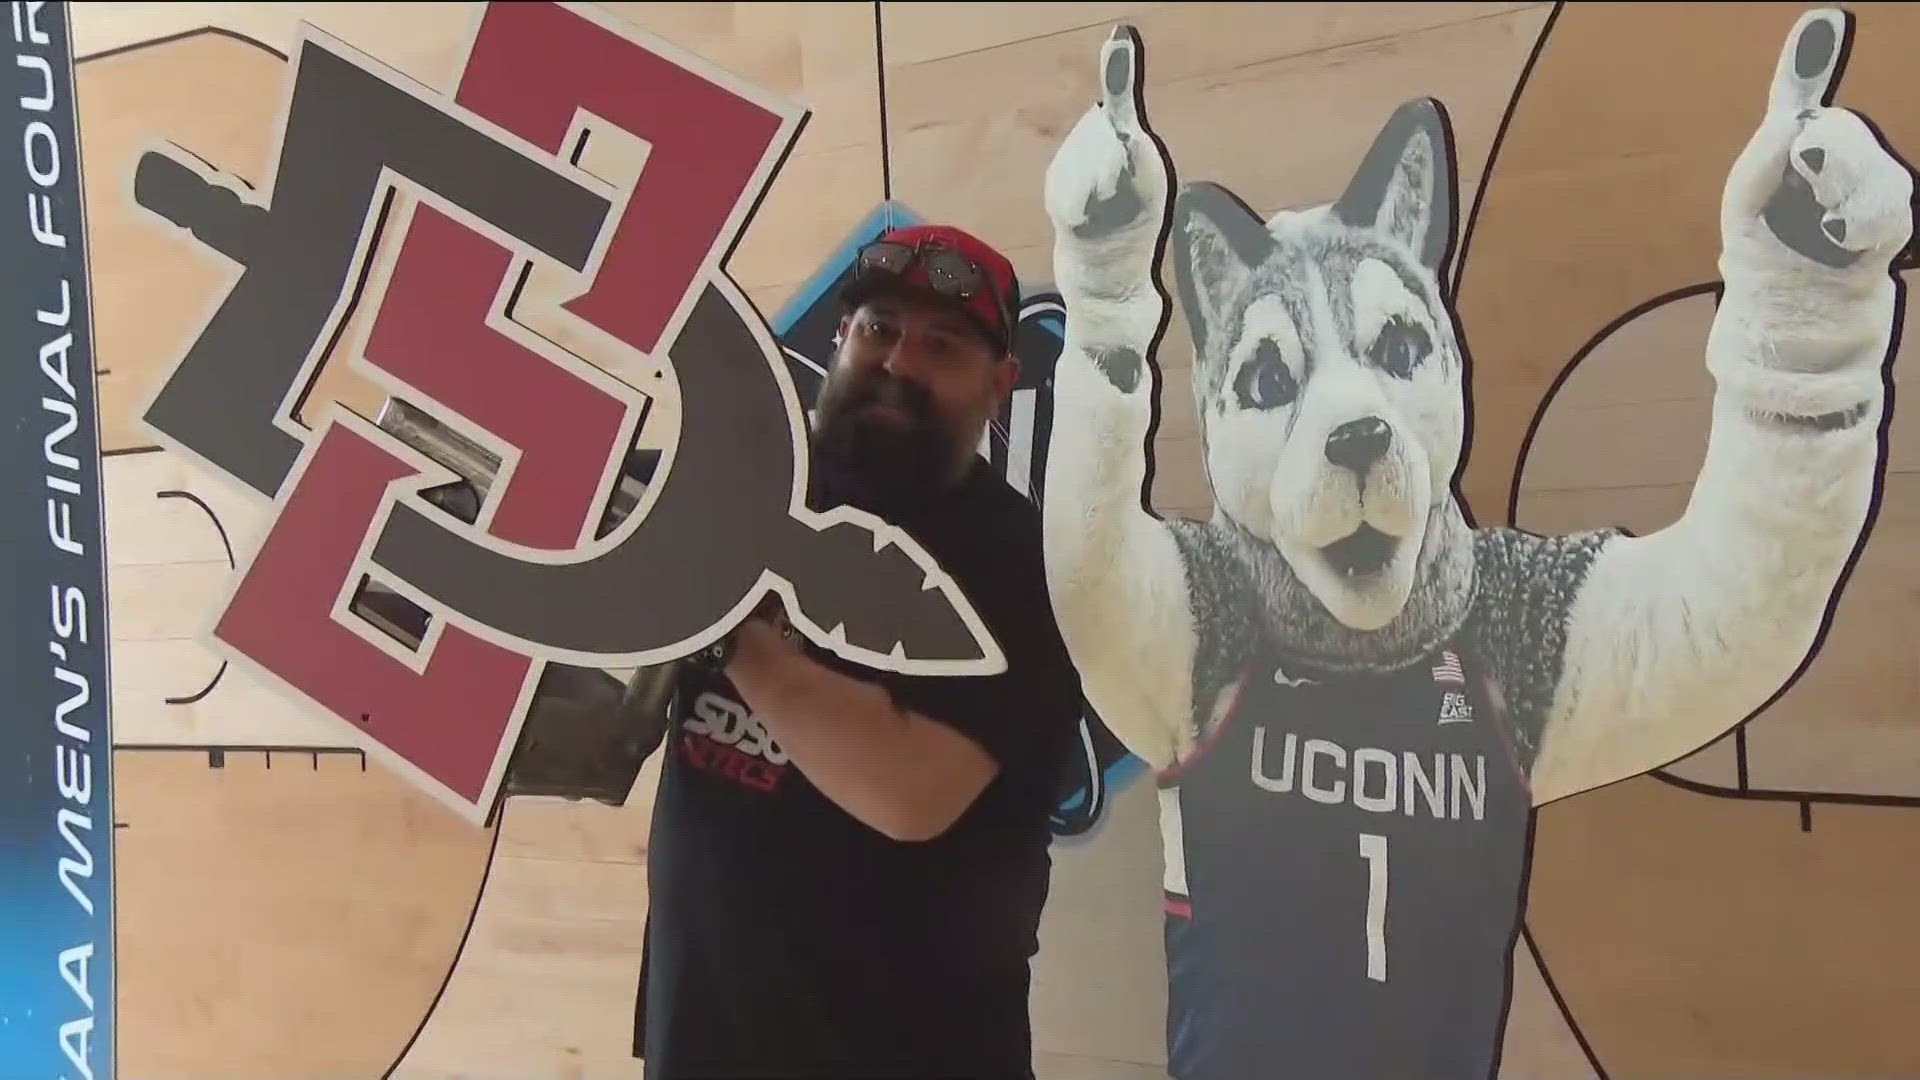 The SDSU basketball team is in Houston for the NCAA Championship game. But you know what's missing? A team mascot.